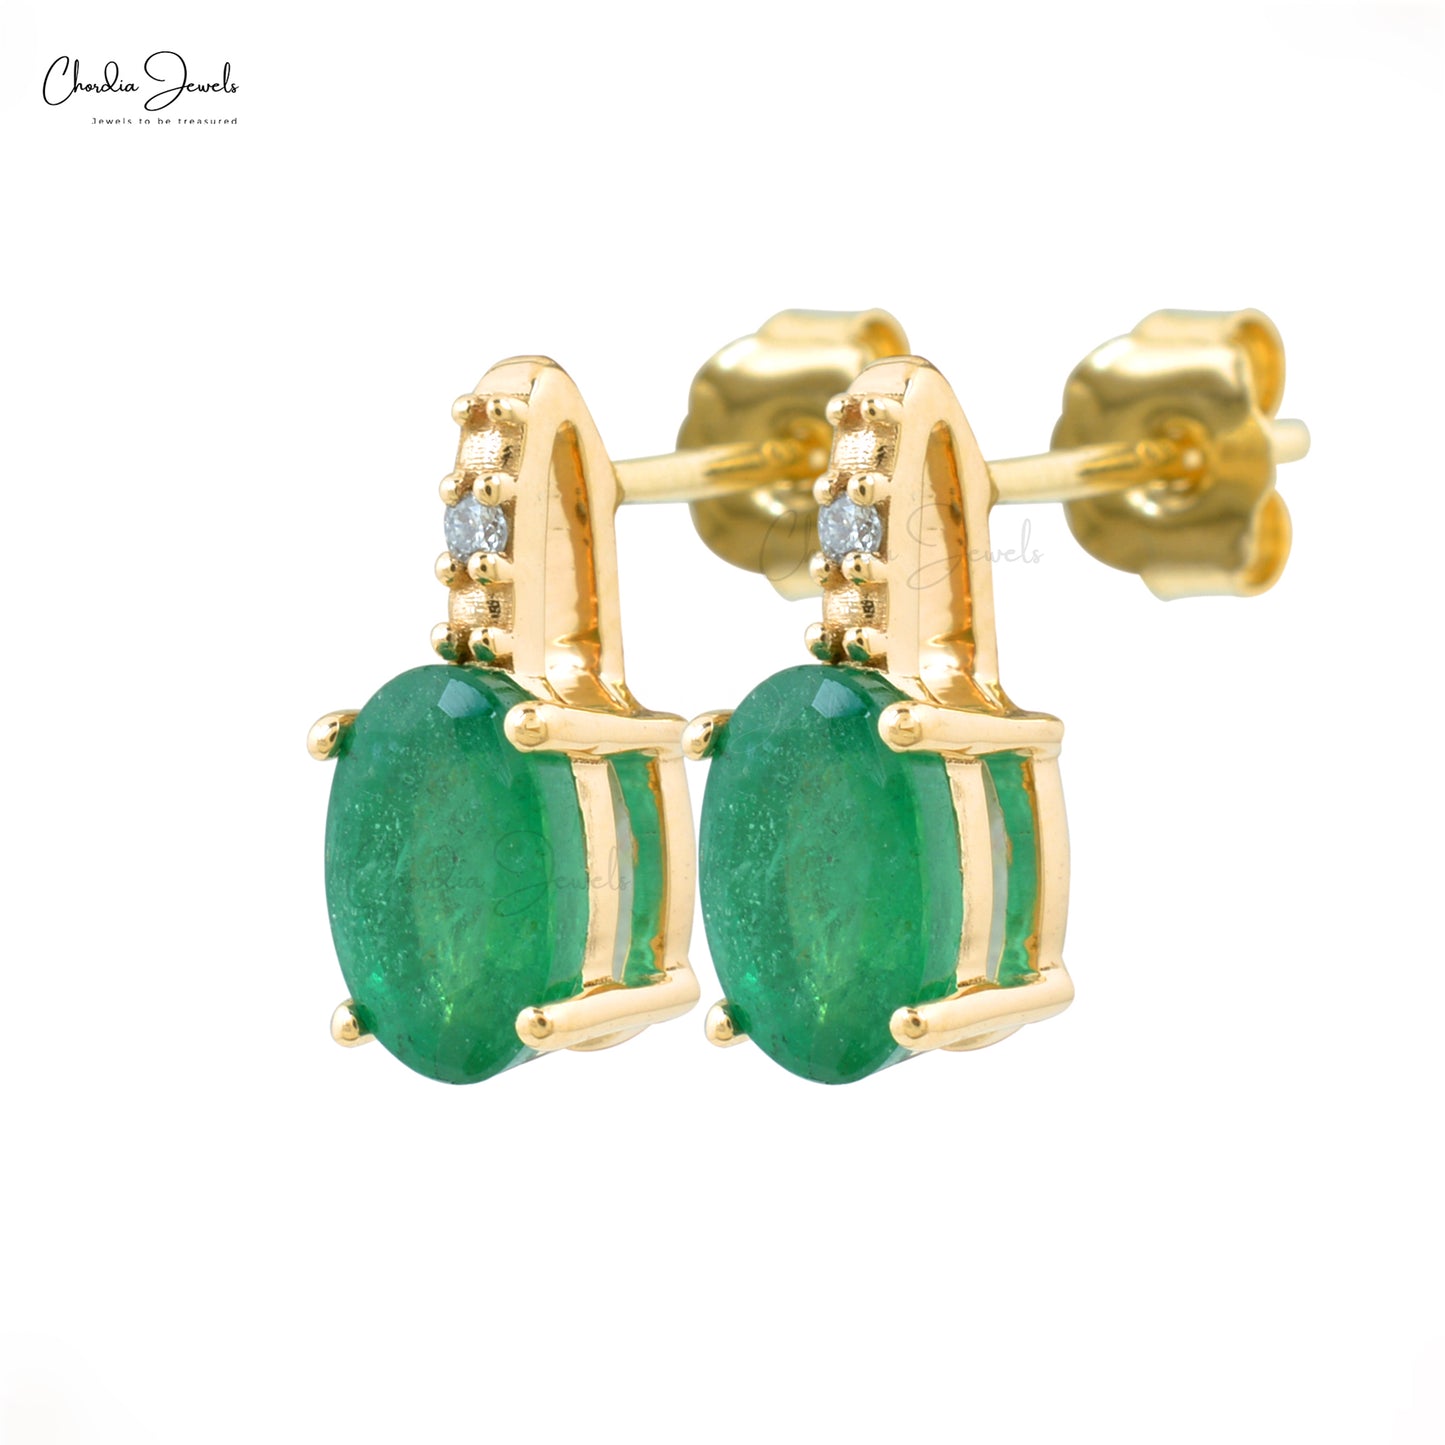 Indulge in the luxury of these delicate earrings.